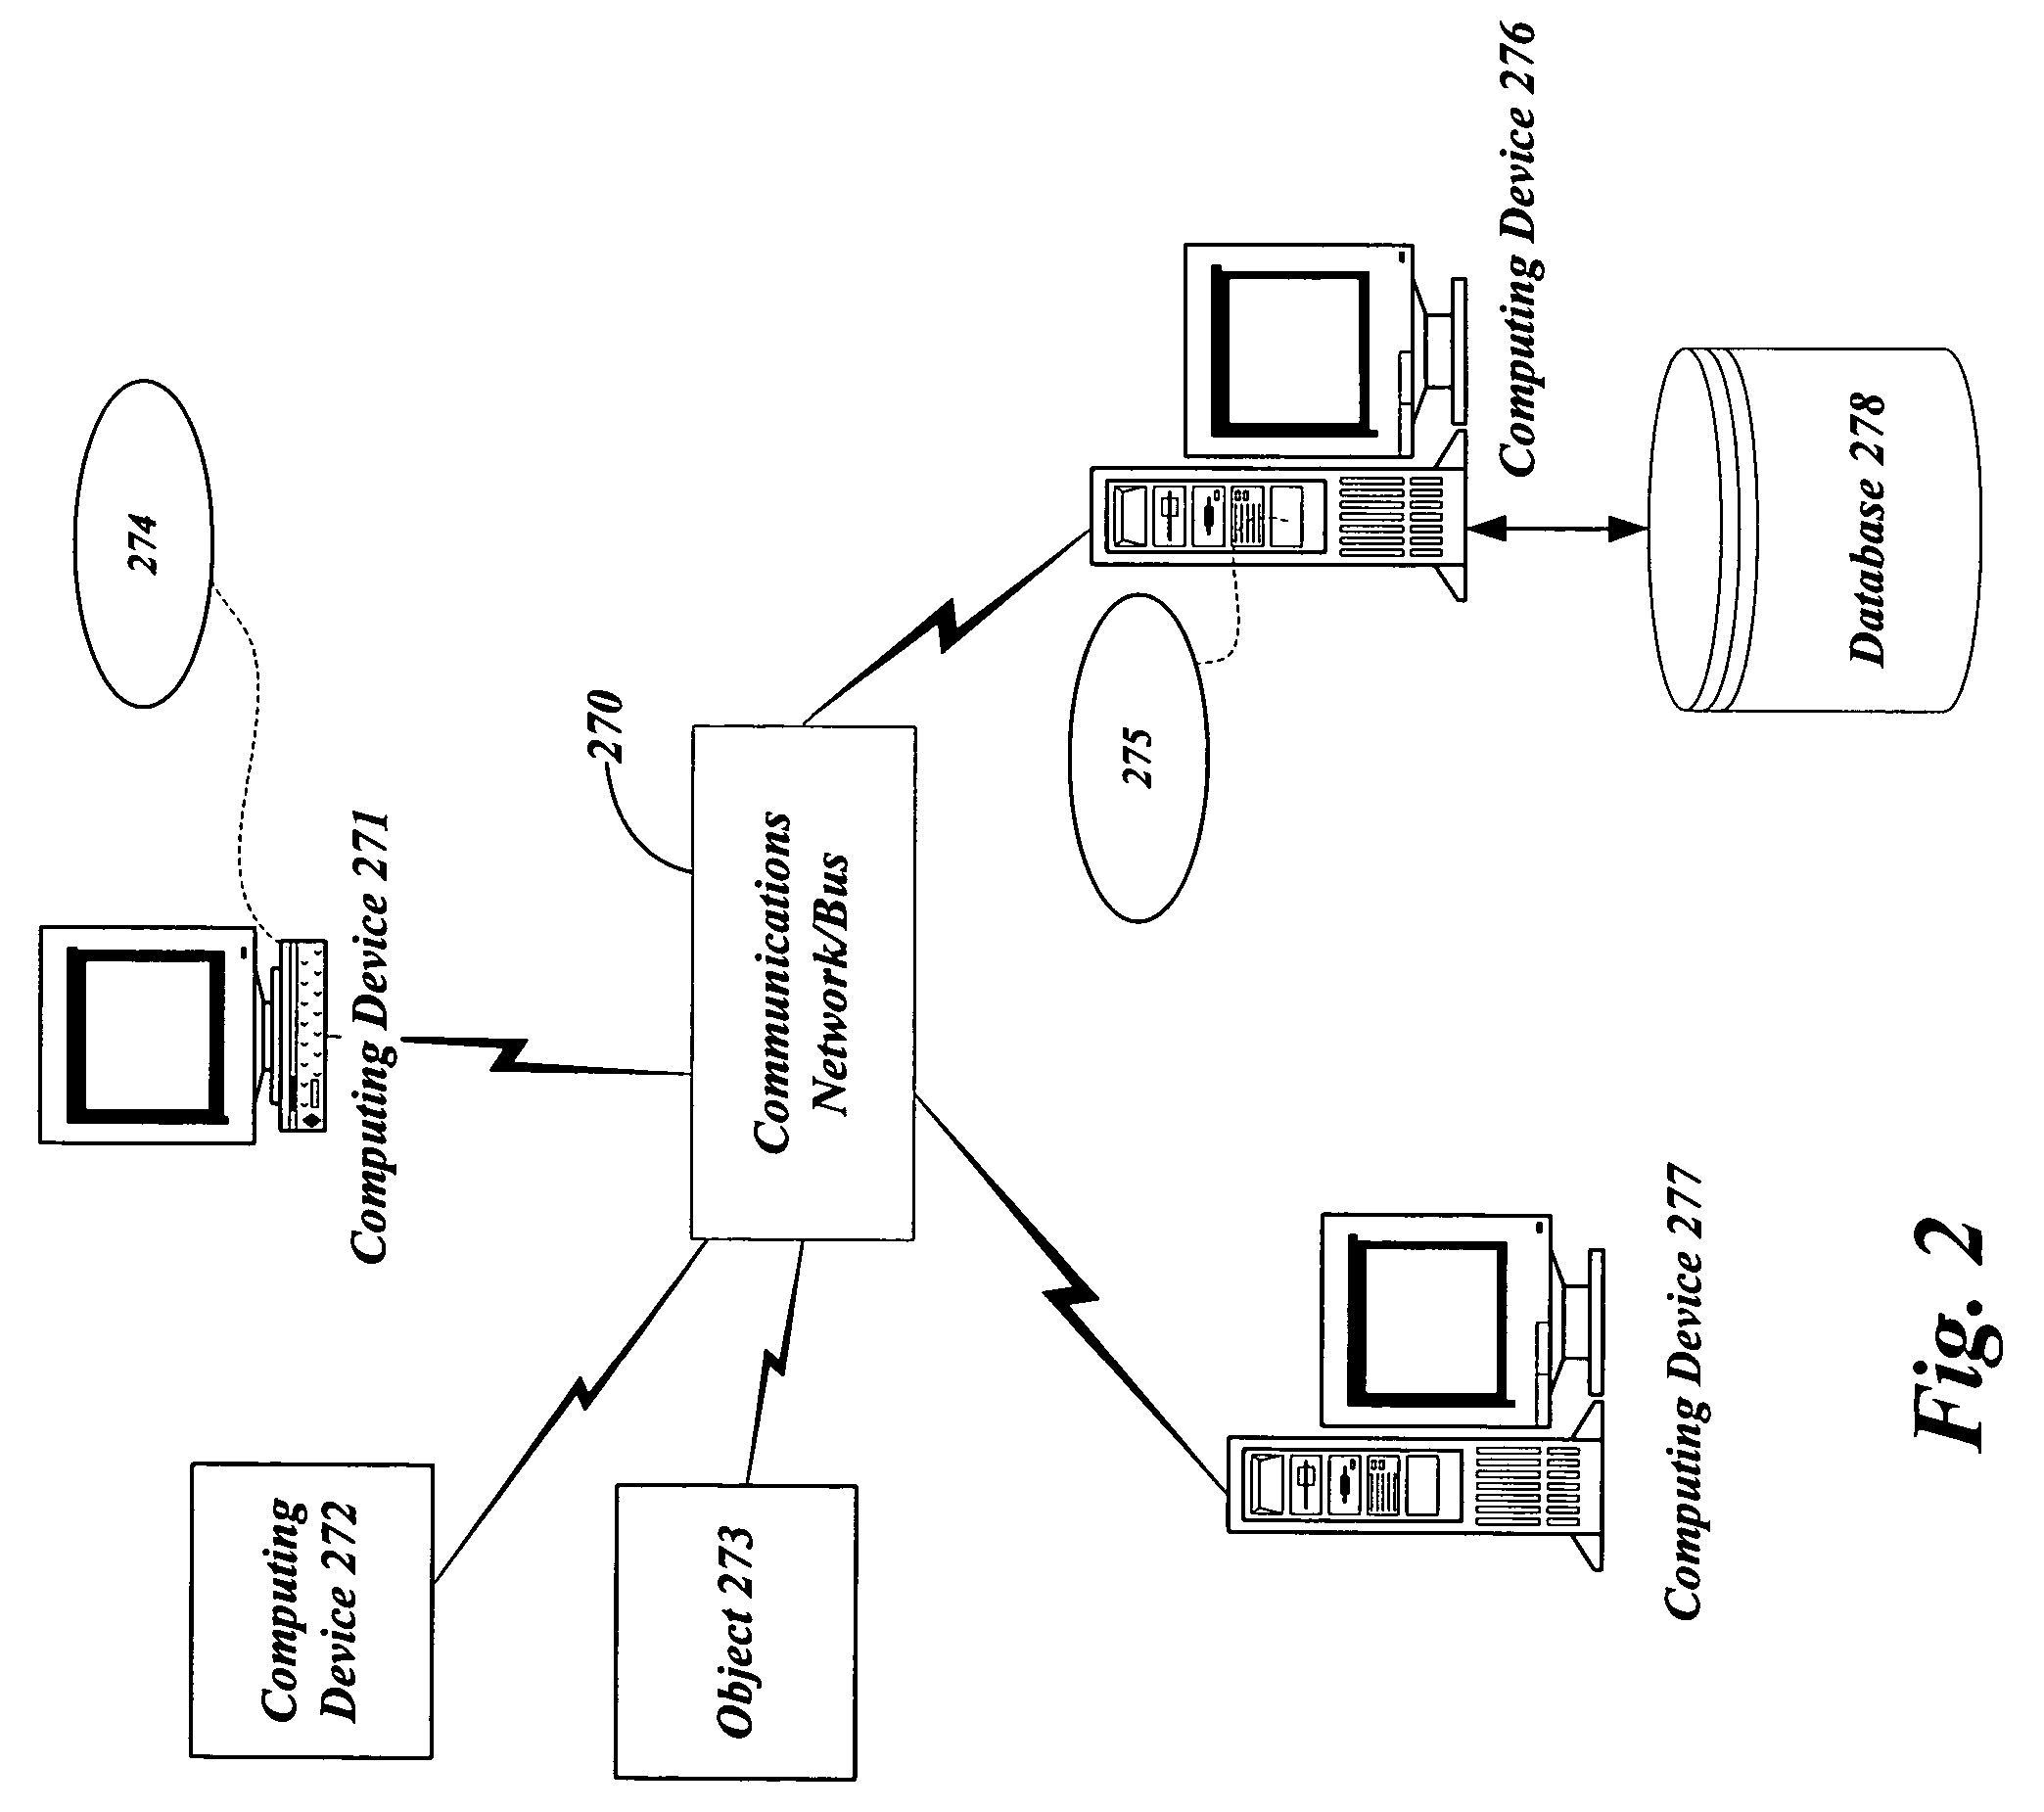 Systems and methods for controlling access to data on a computer with a secure boot process